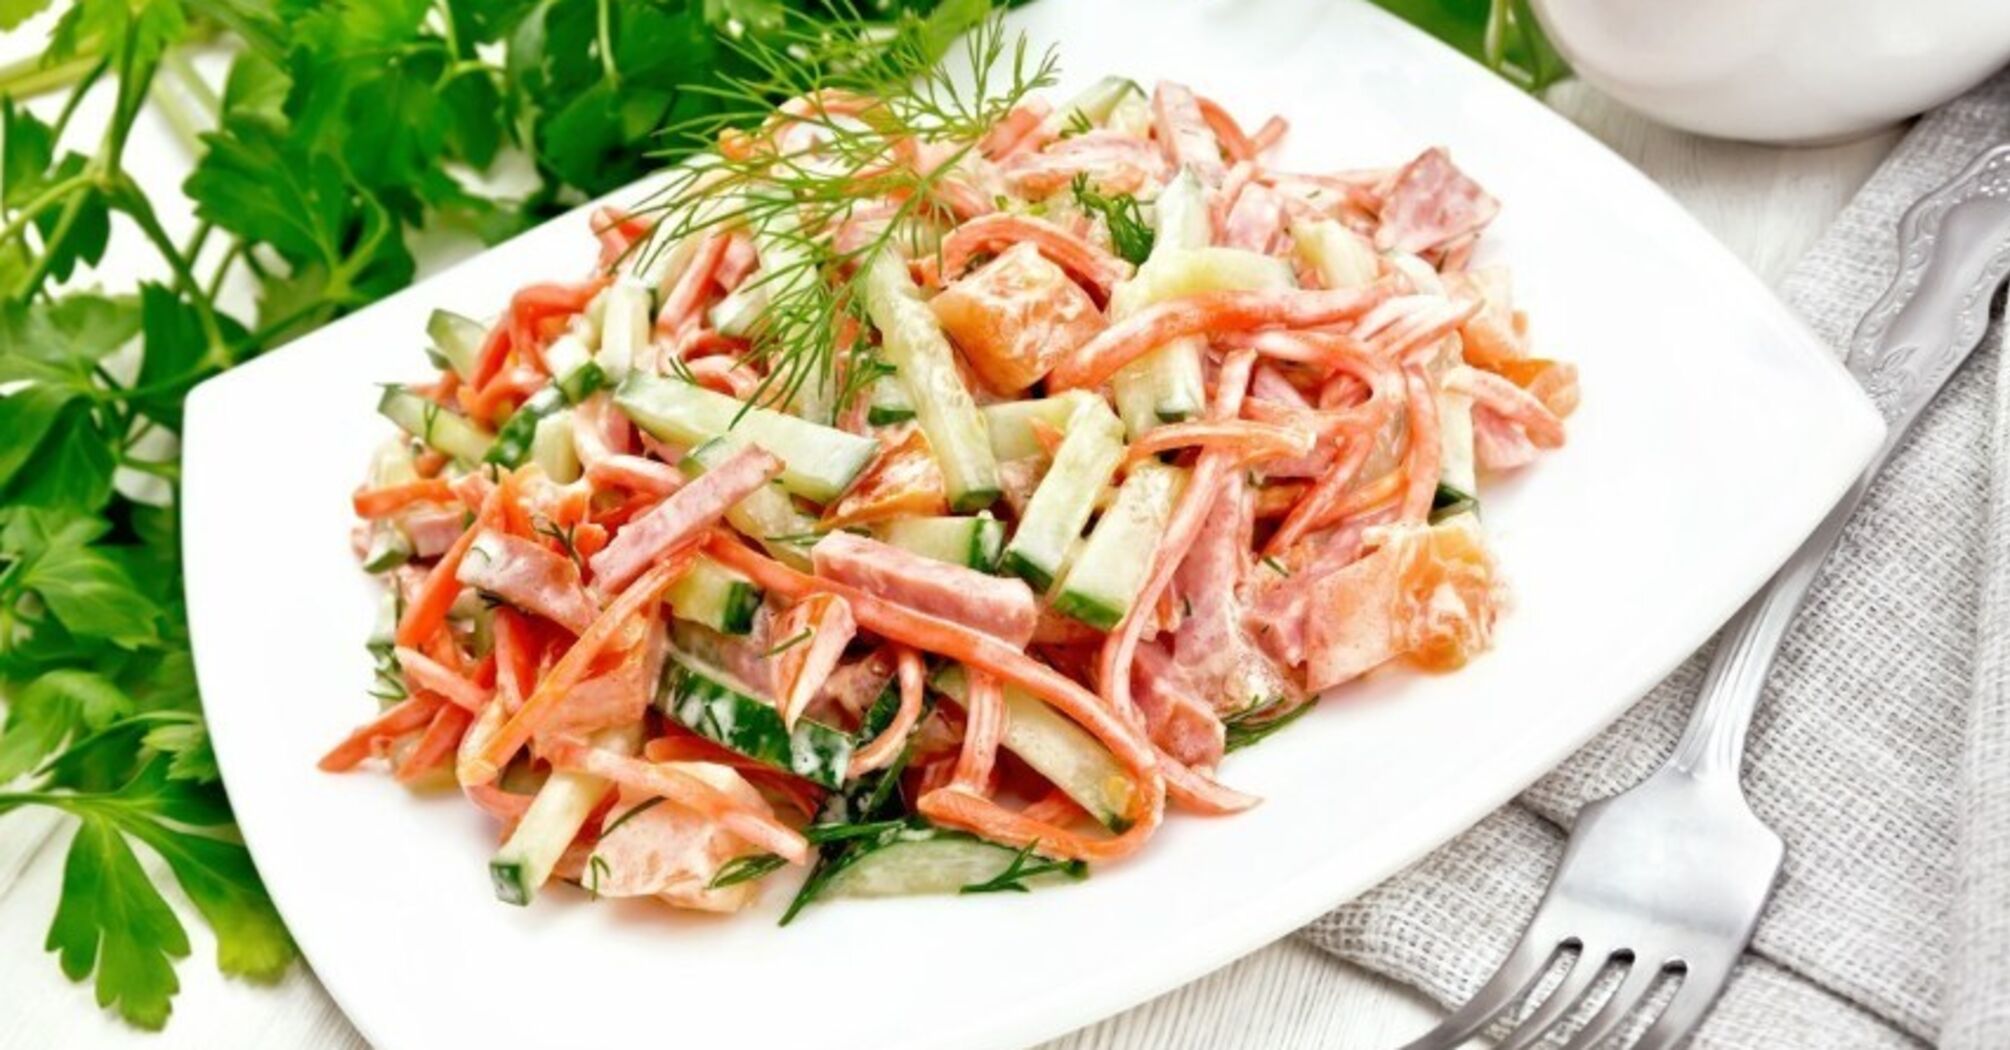 Recipes for salads with Korean carrots and mayonnaise